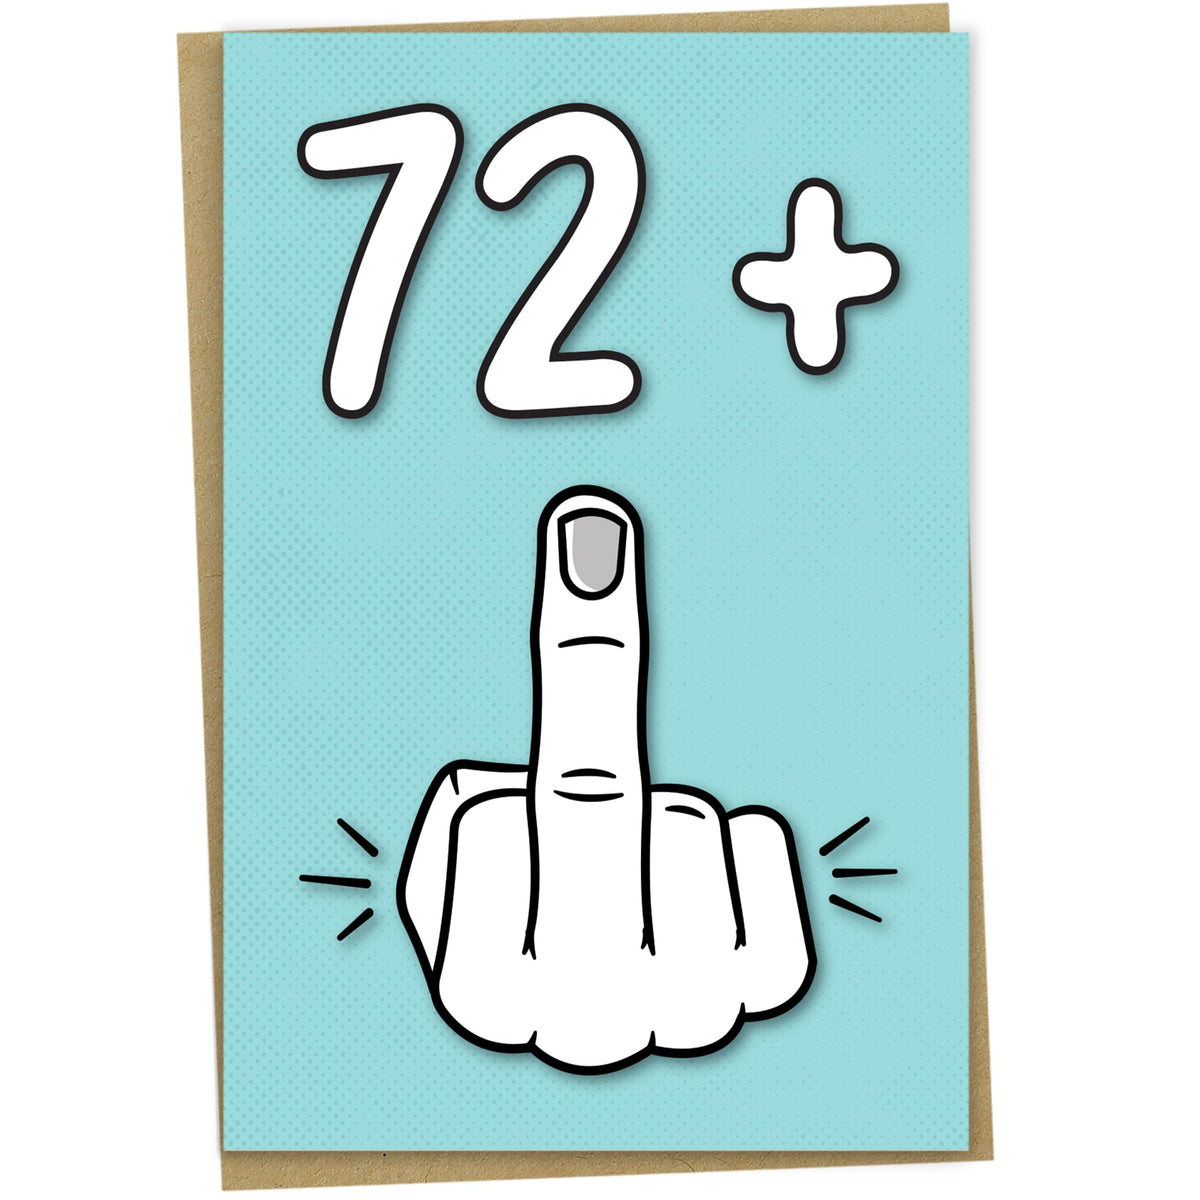 73rd Birthday Card, 72 and 1, Funny Birthday Card for 73 Year Old Women or Men, 5x7